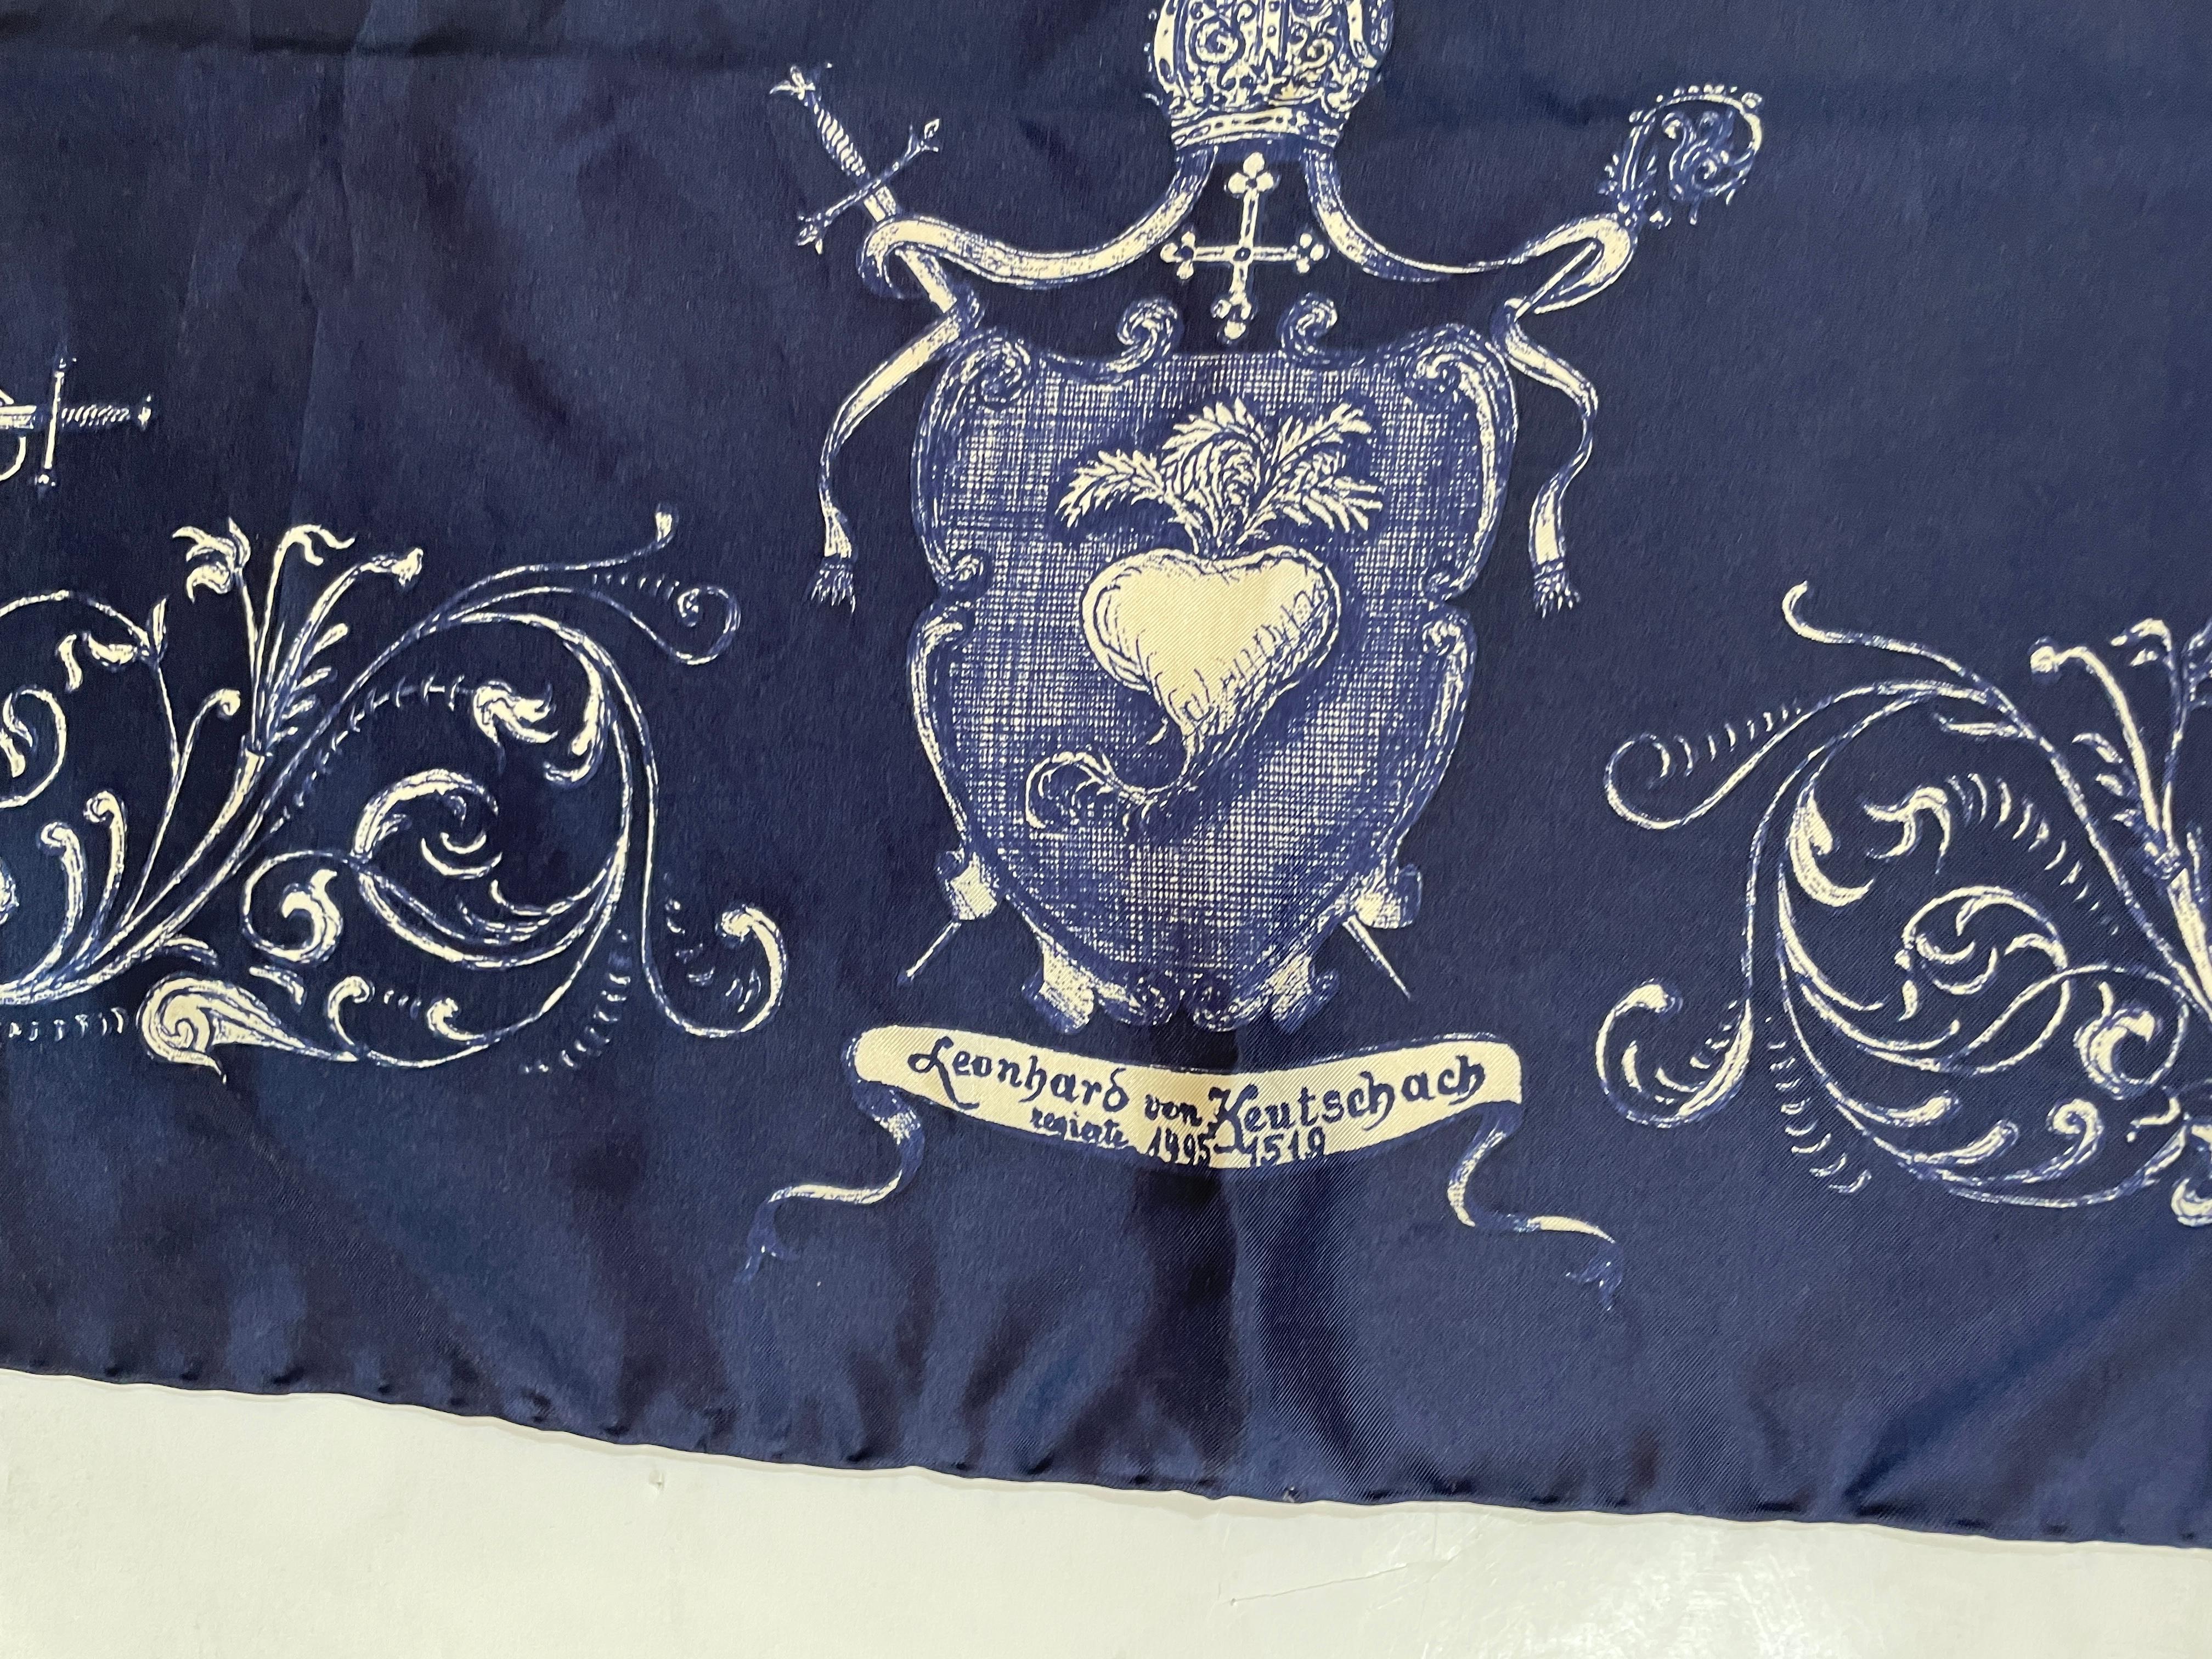 Vintage Silk Scarf of The Prince Archbishops of Salzburg with Coat Of Arms For Sale 7